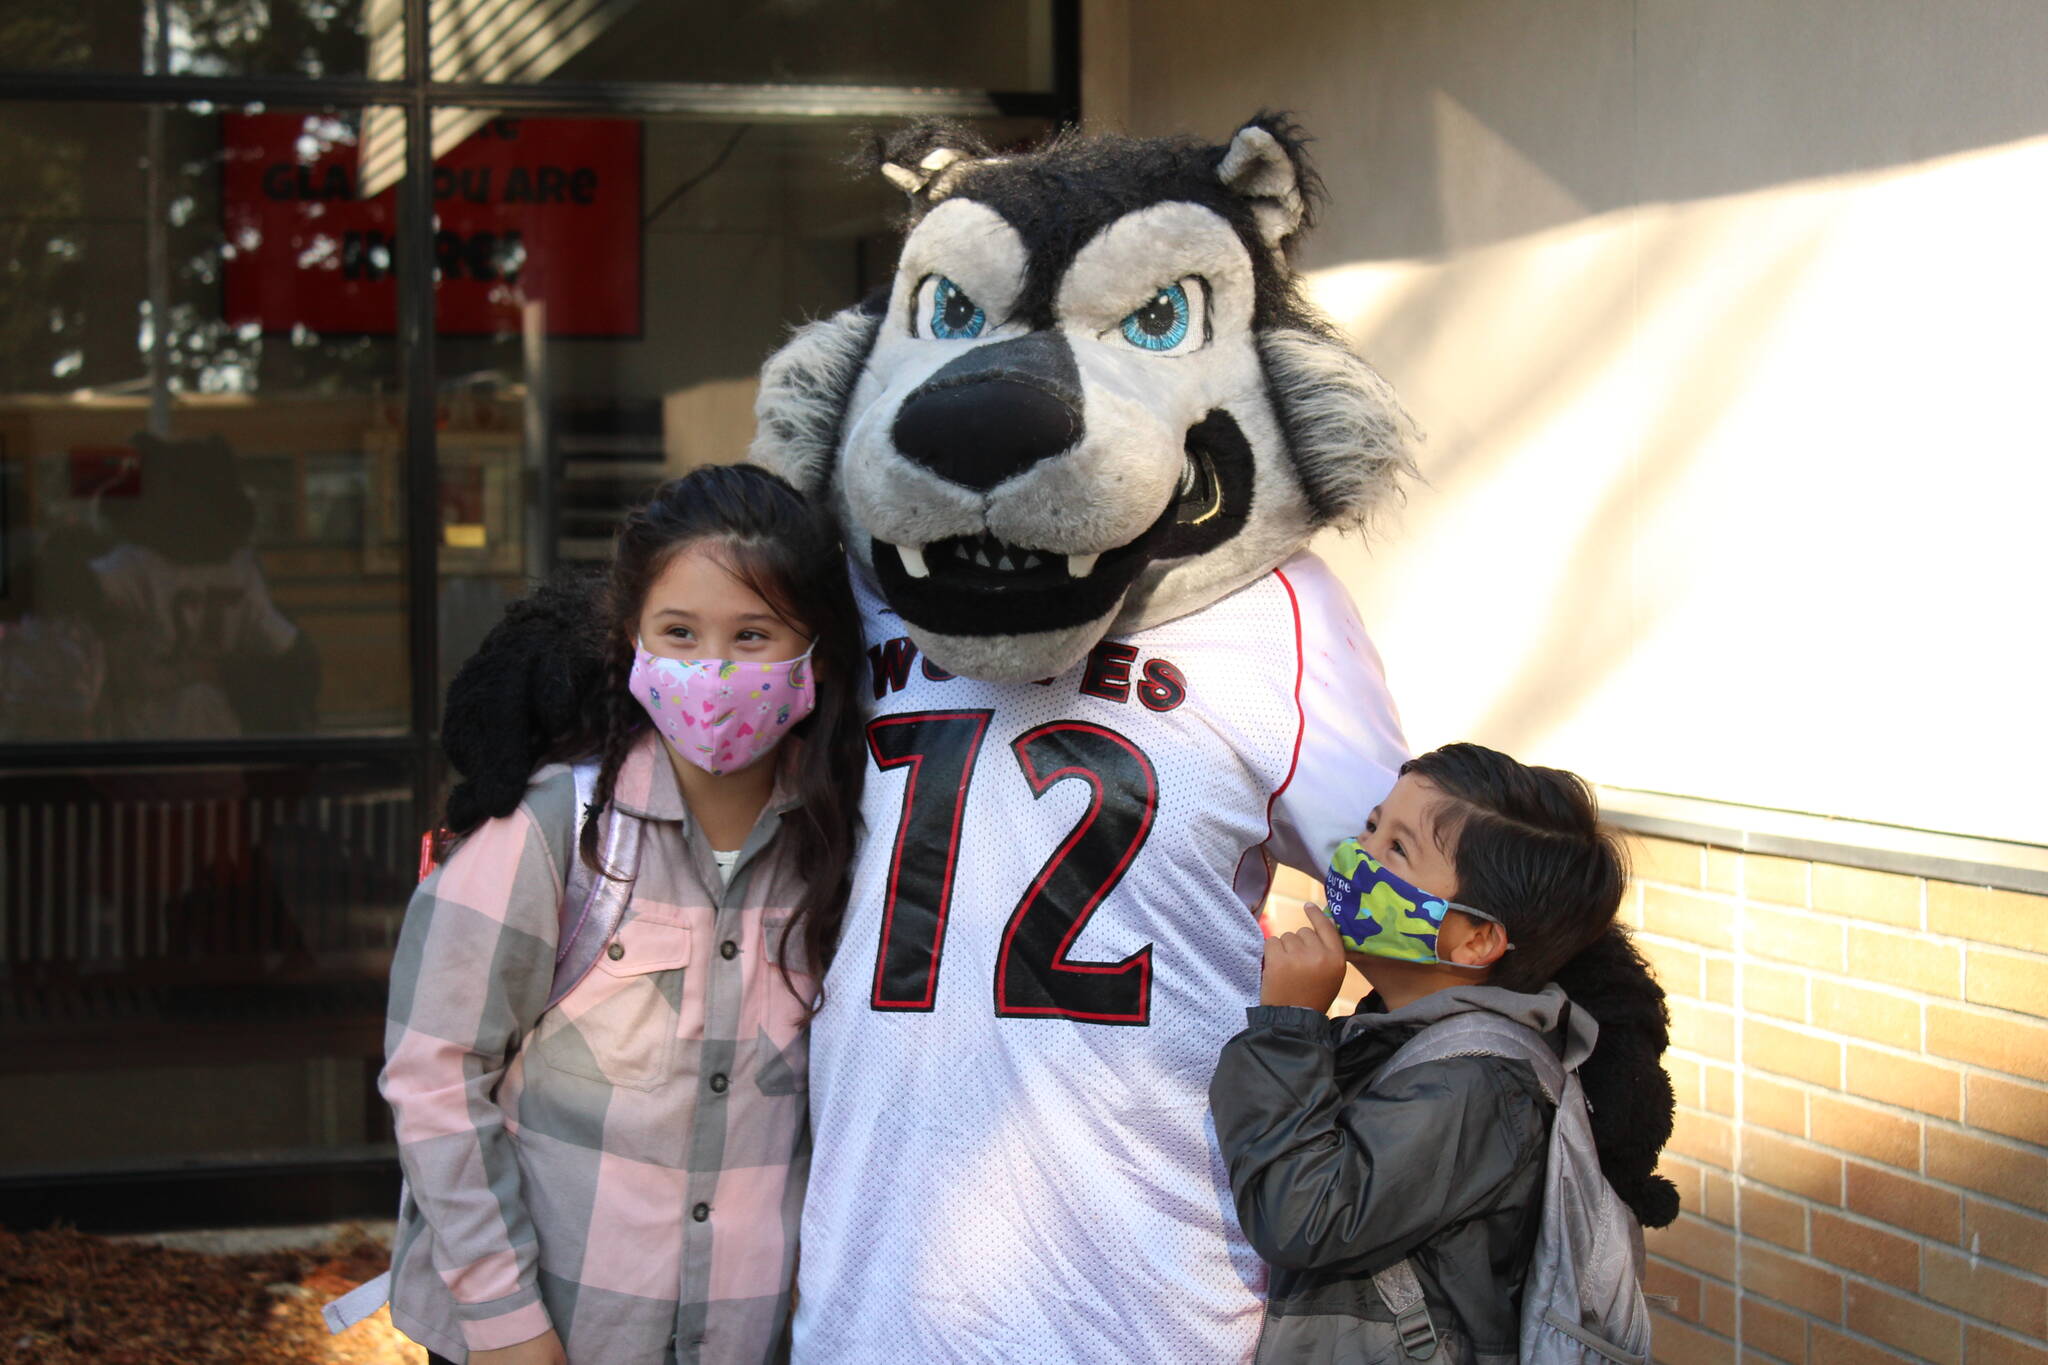 Isadora and Mateo Jimenez Campos stop for a picture with the wolf pup mascot. (Photo by Karina Andrew/Whidbey News-Times)